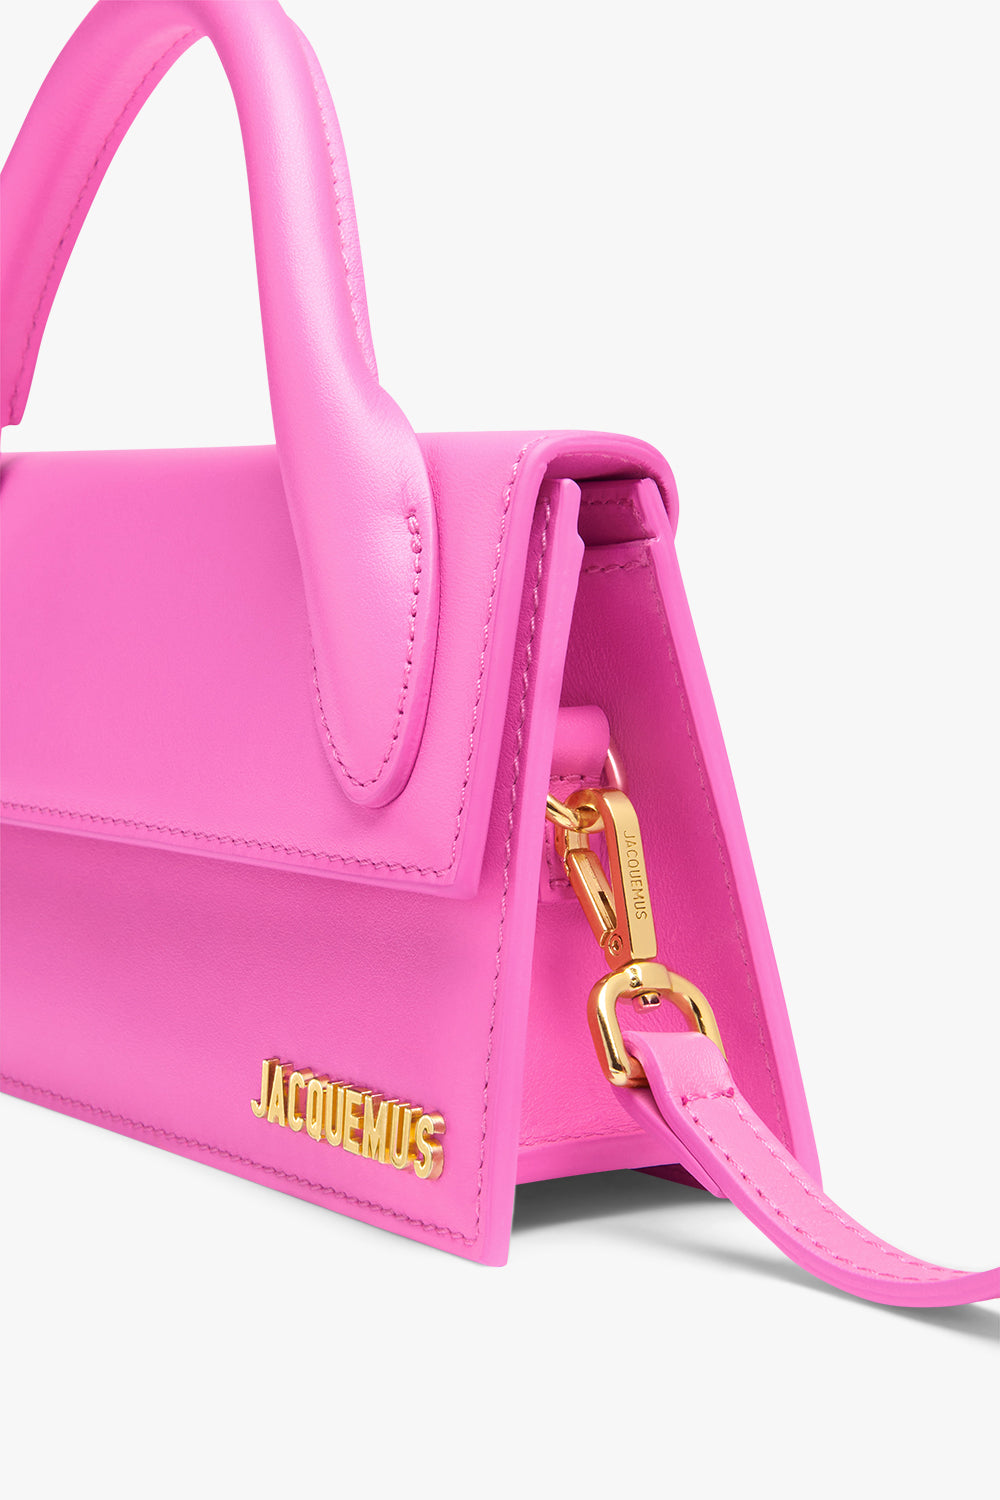 JACQUEMUS BAGS Pink Le Chiquito Long Bag | Neon Pink